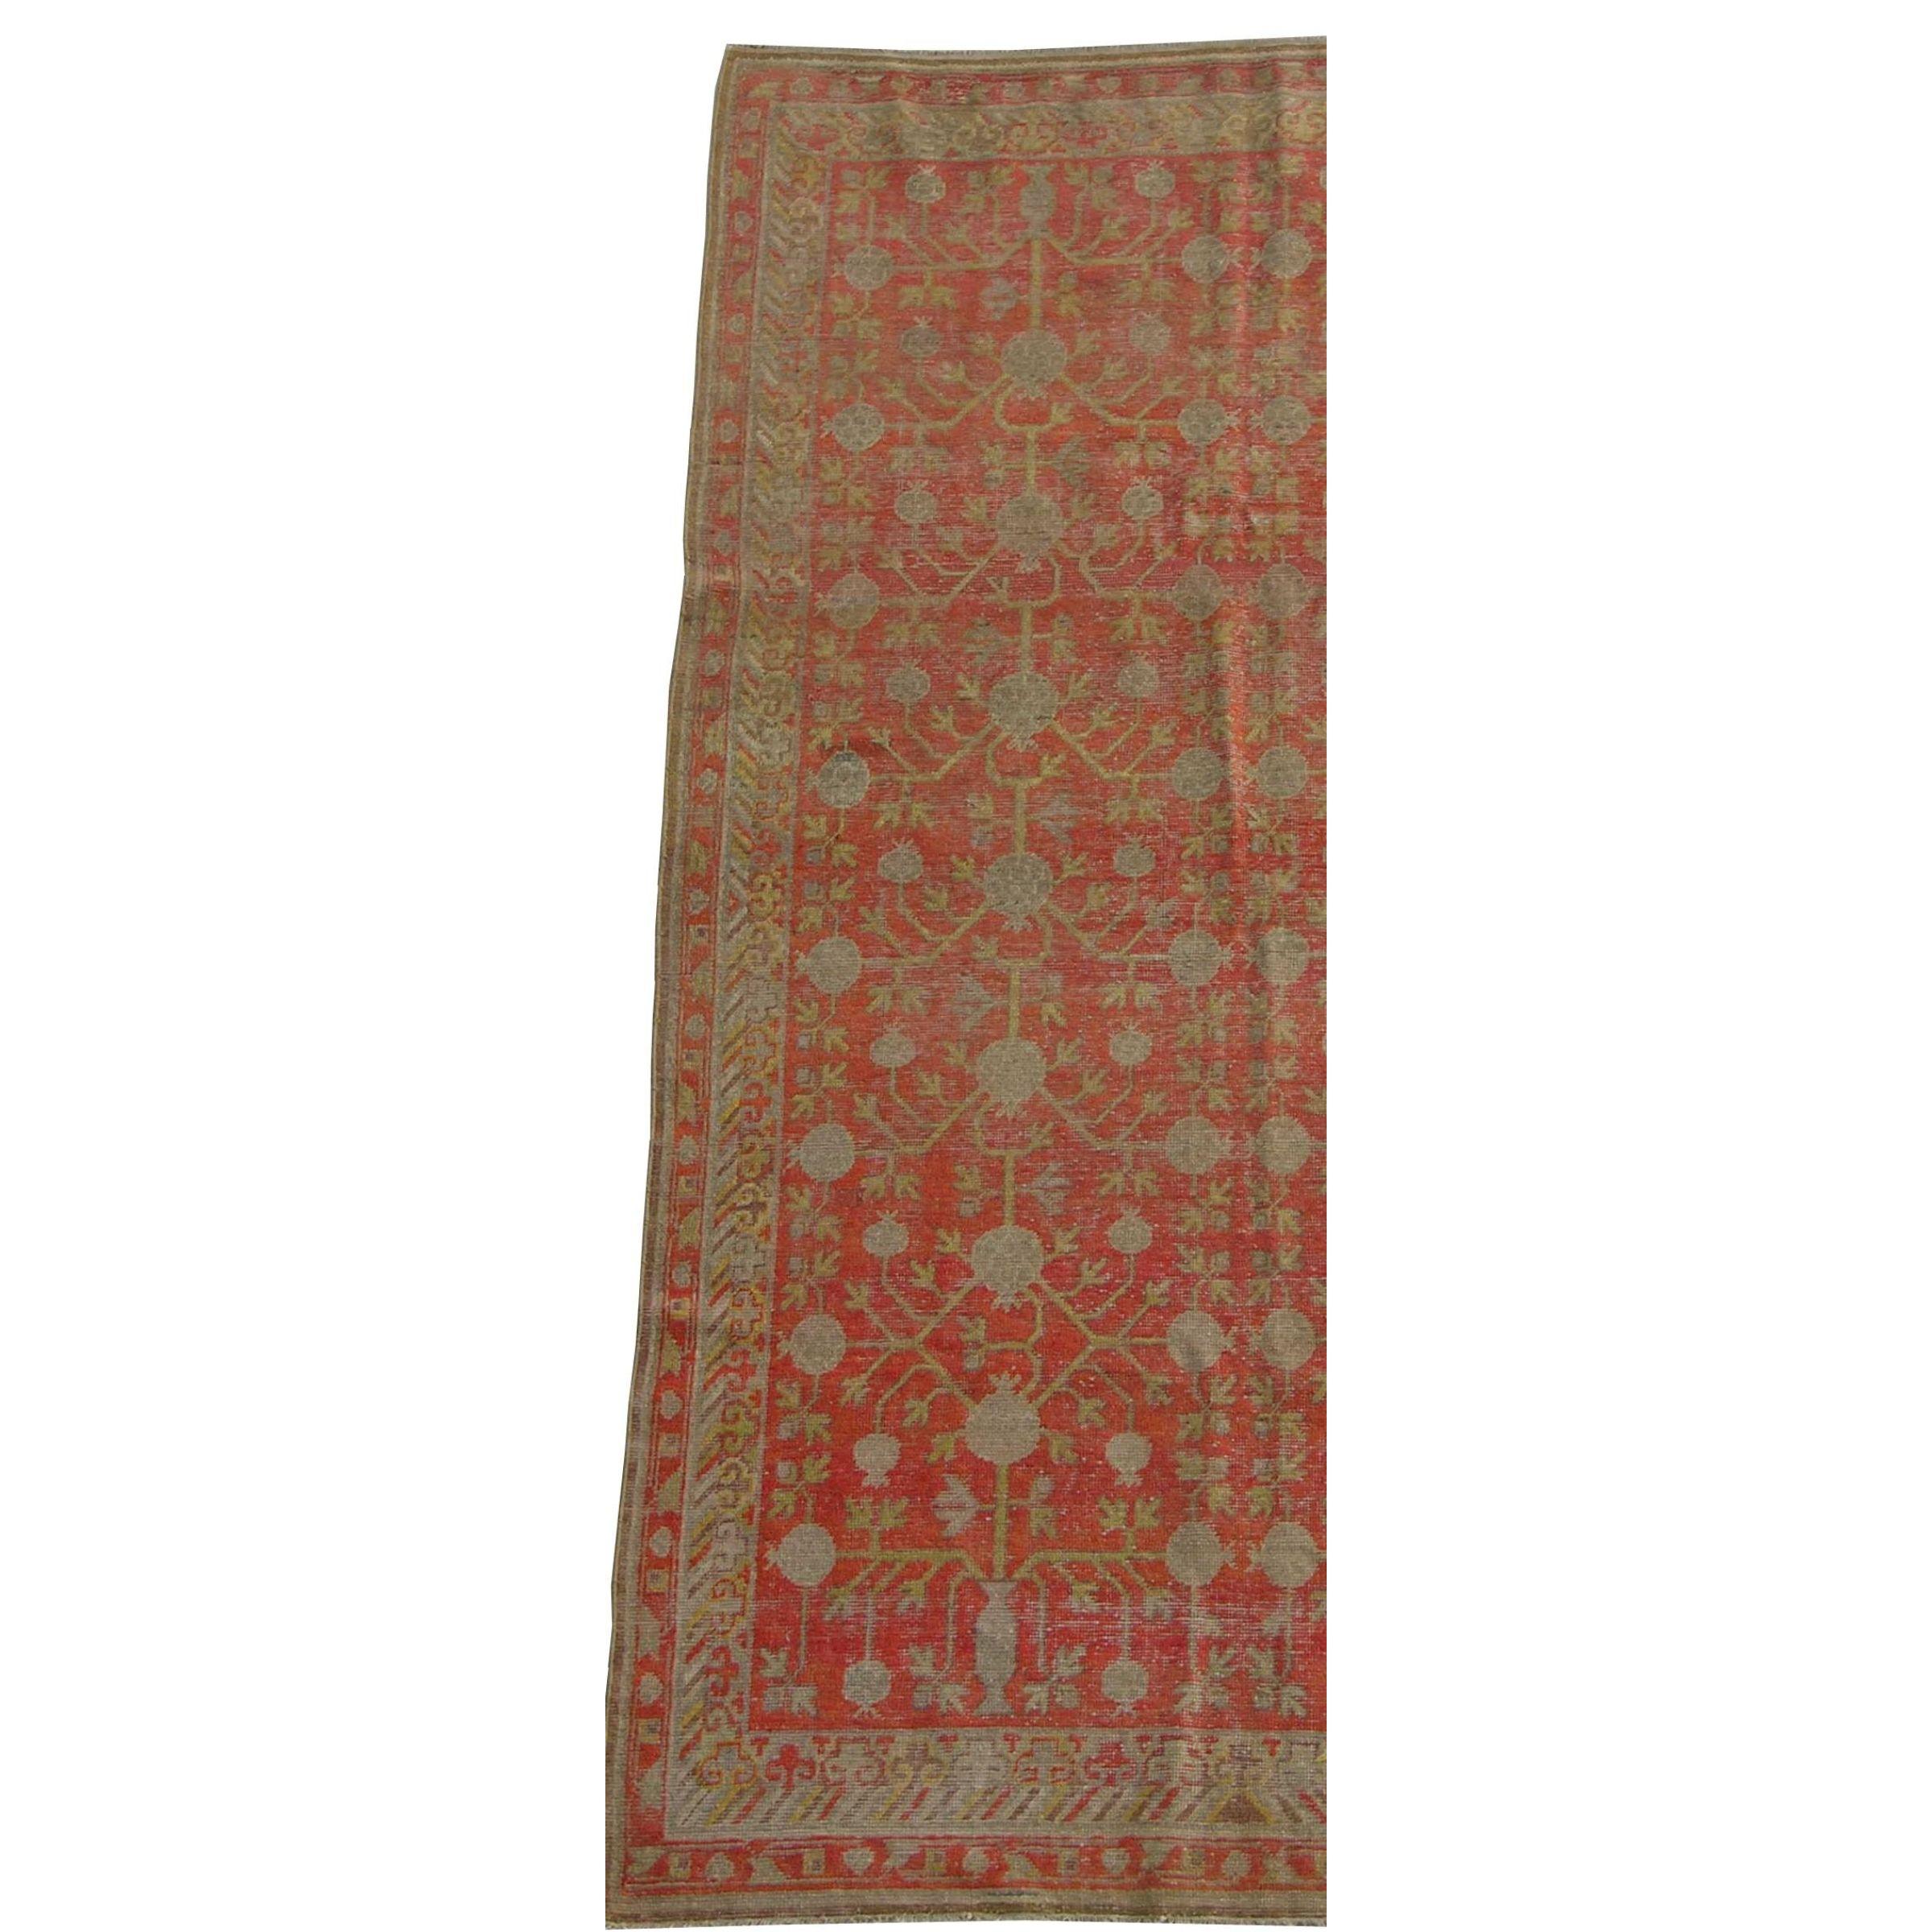 Antique Samarkand Rug 1900 -8'7'' X 4'8'' In Good Condition For Sale In Los Angeles, US